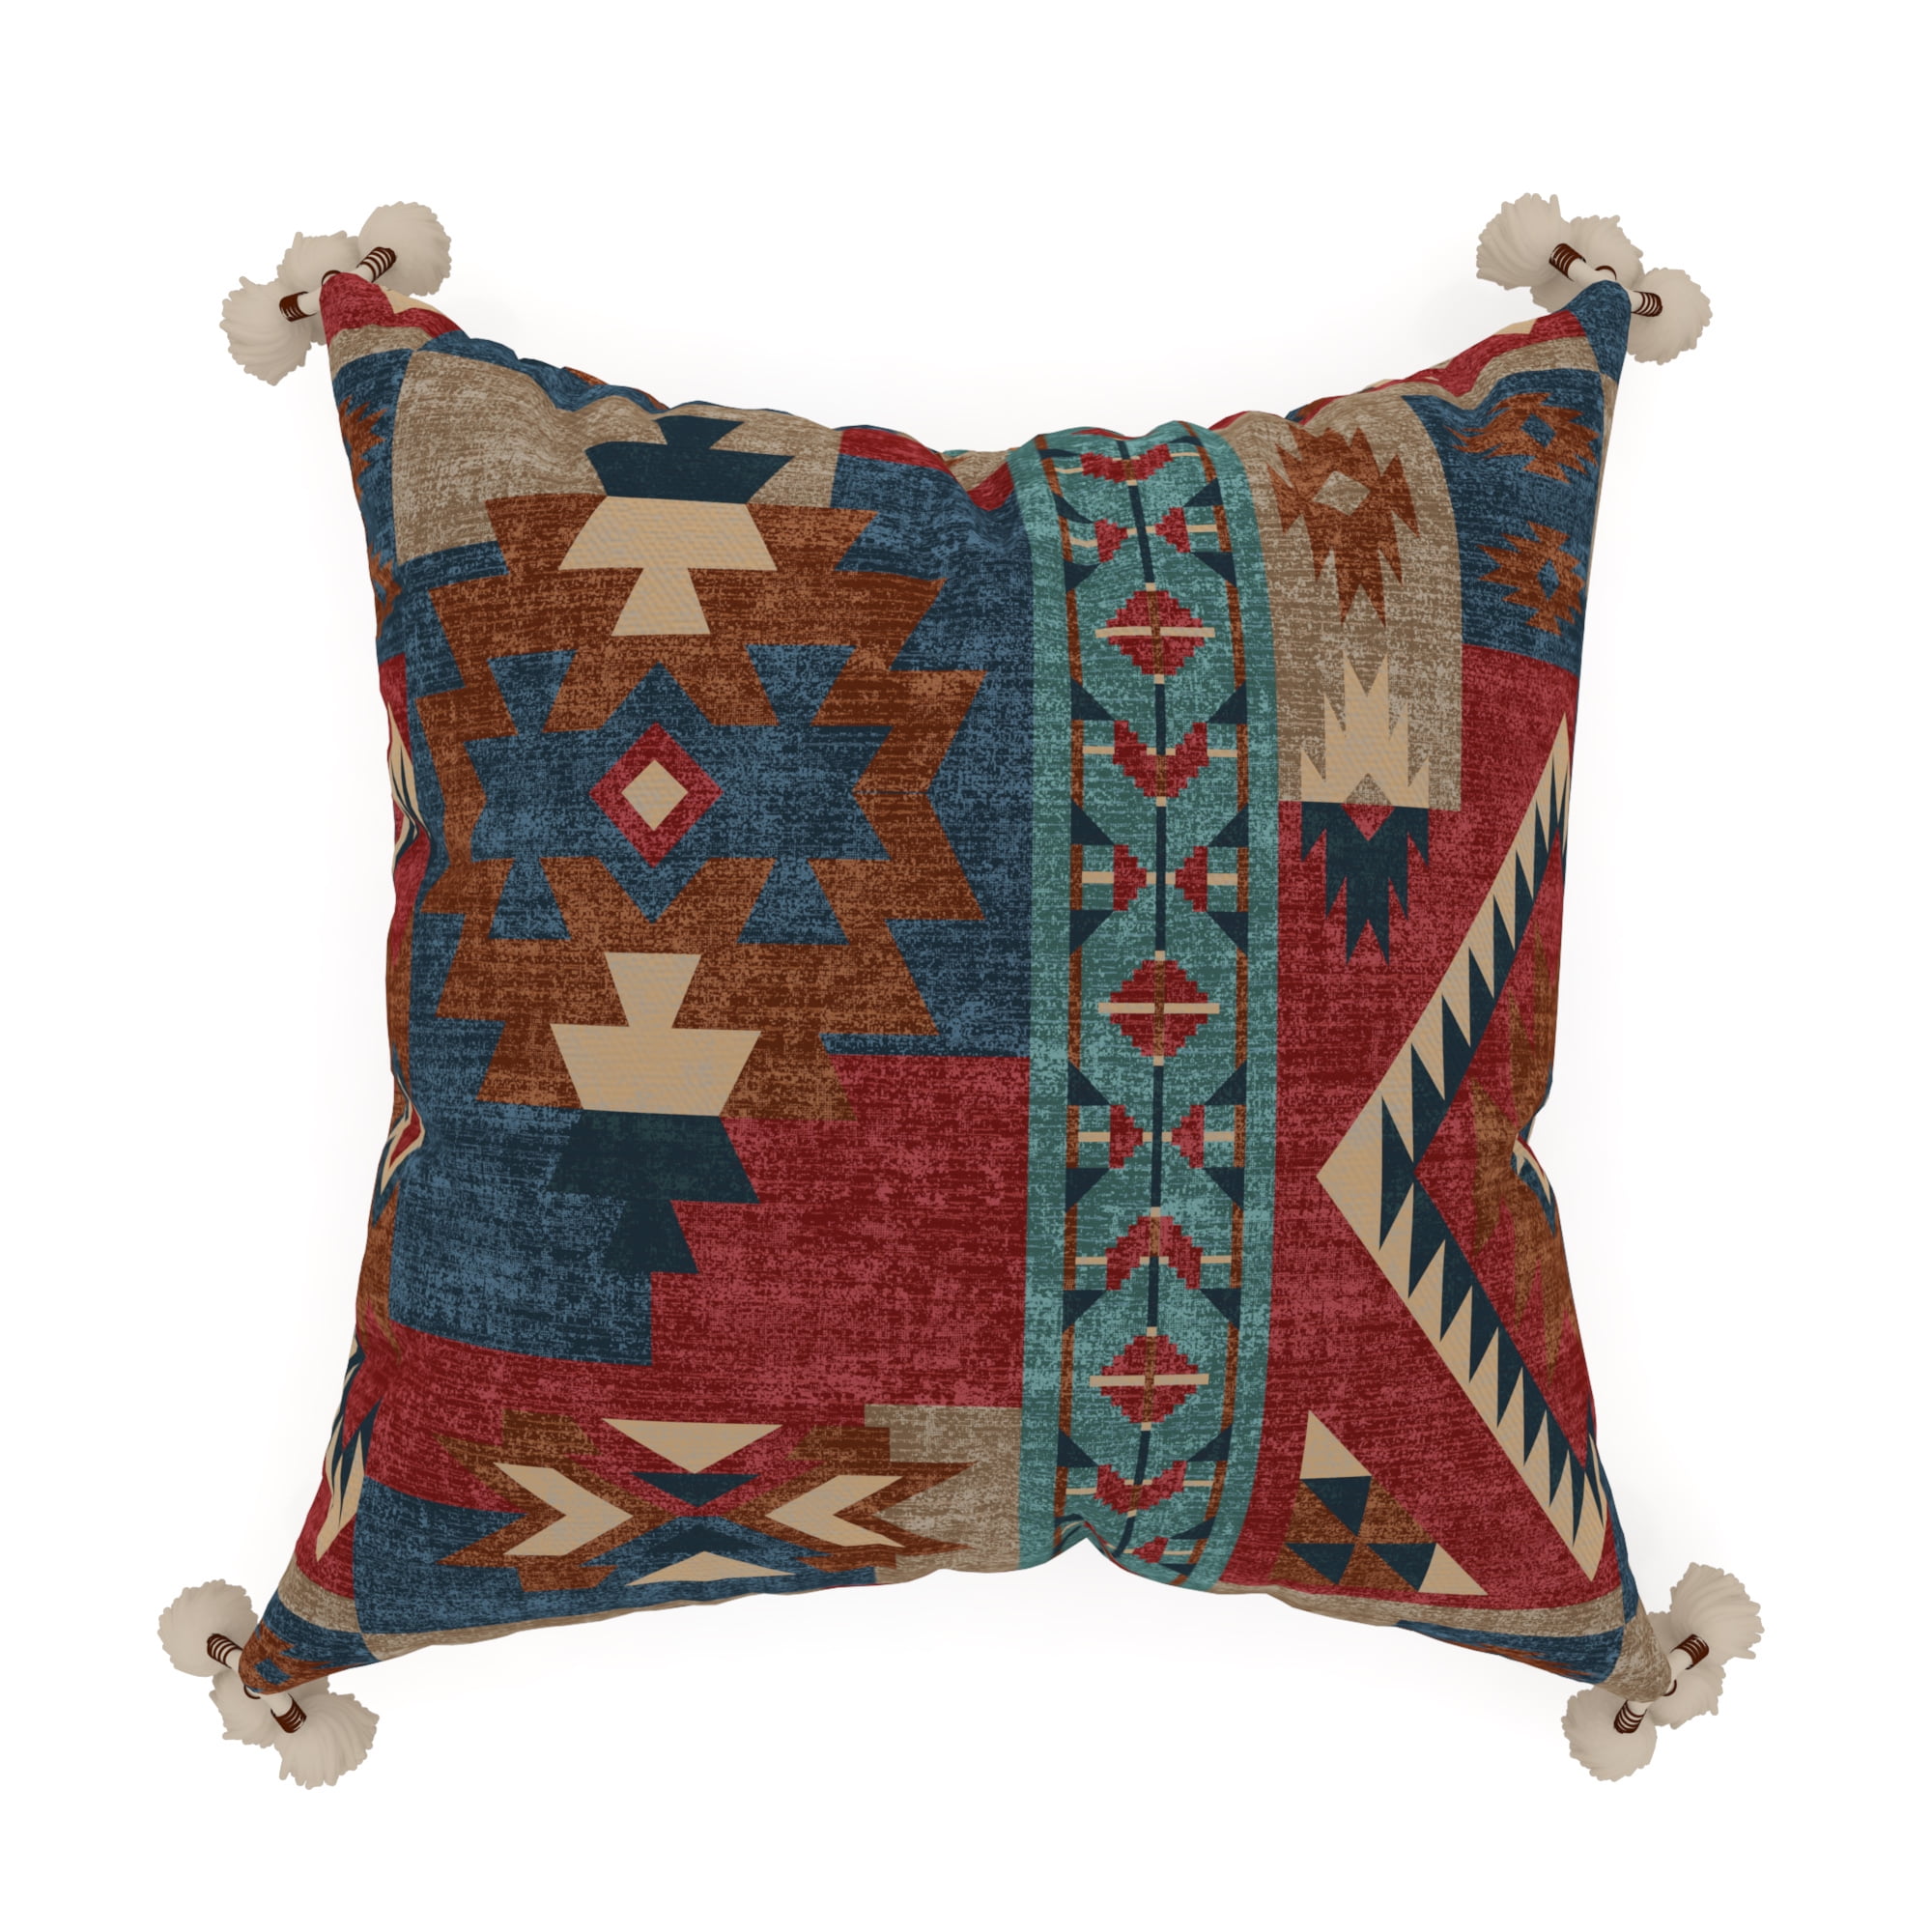 African American Tribal Pillow Covers 18 X 18 Decorative Pillows Throw Pillow Cases Protector Sofa Couch Pillows African Decor